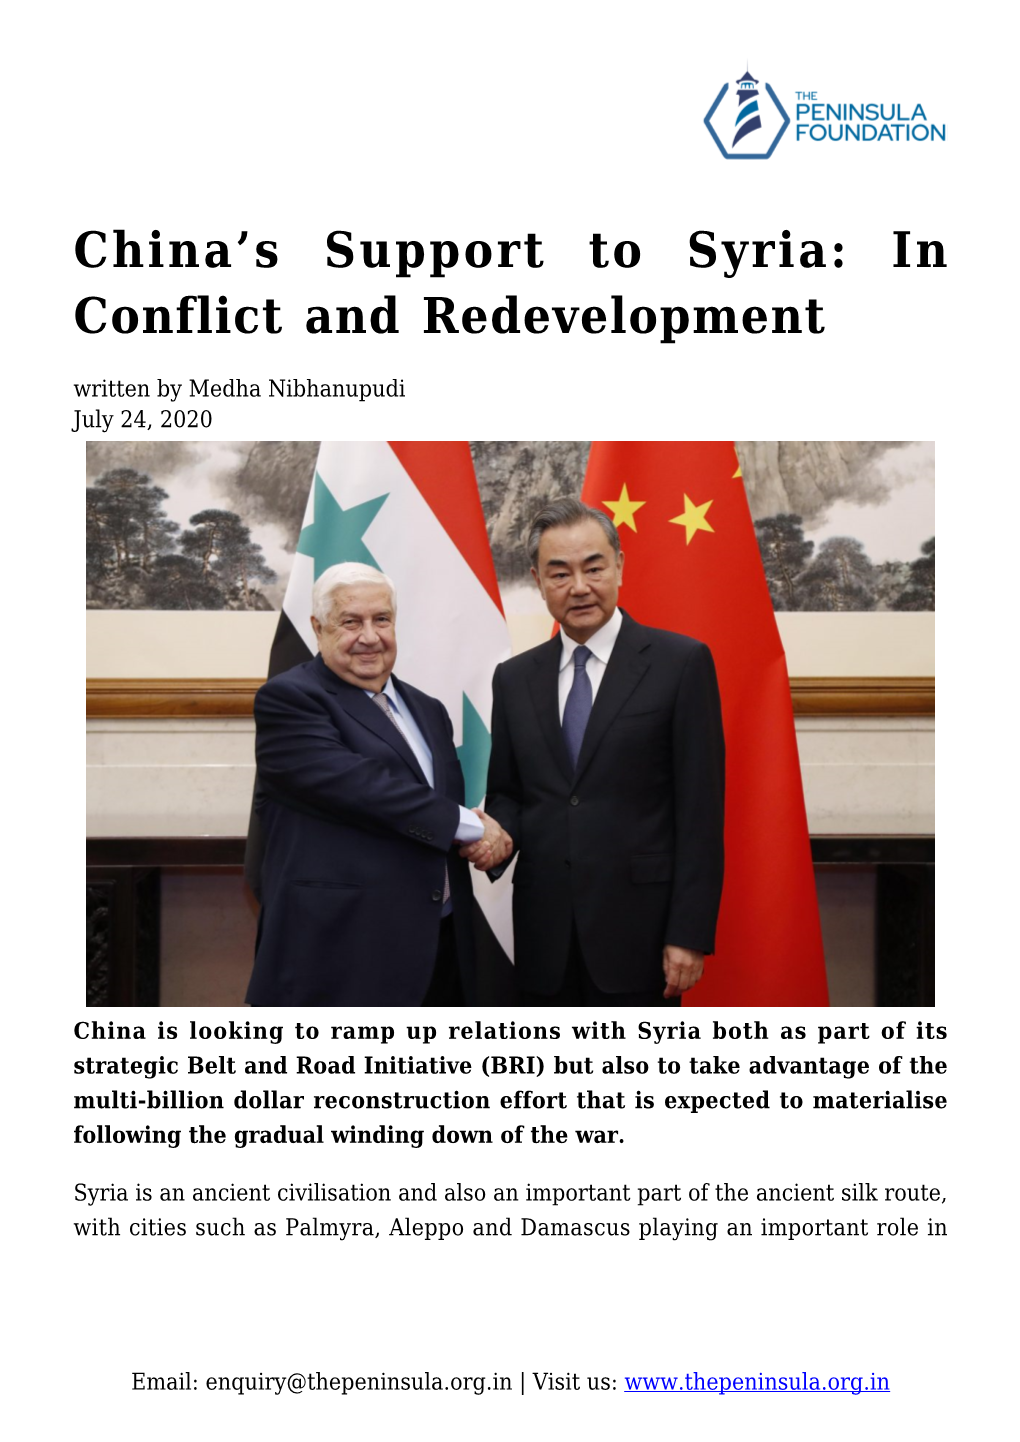 China's Support to Syria: in Conflict and Redevelopment